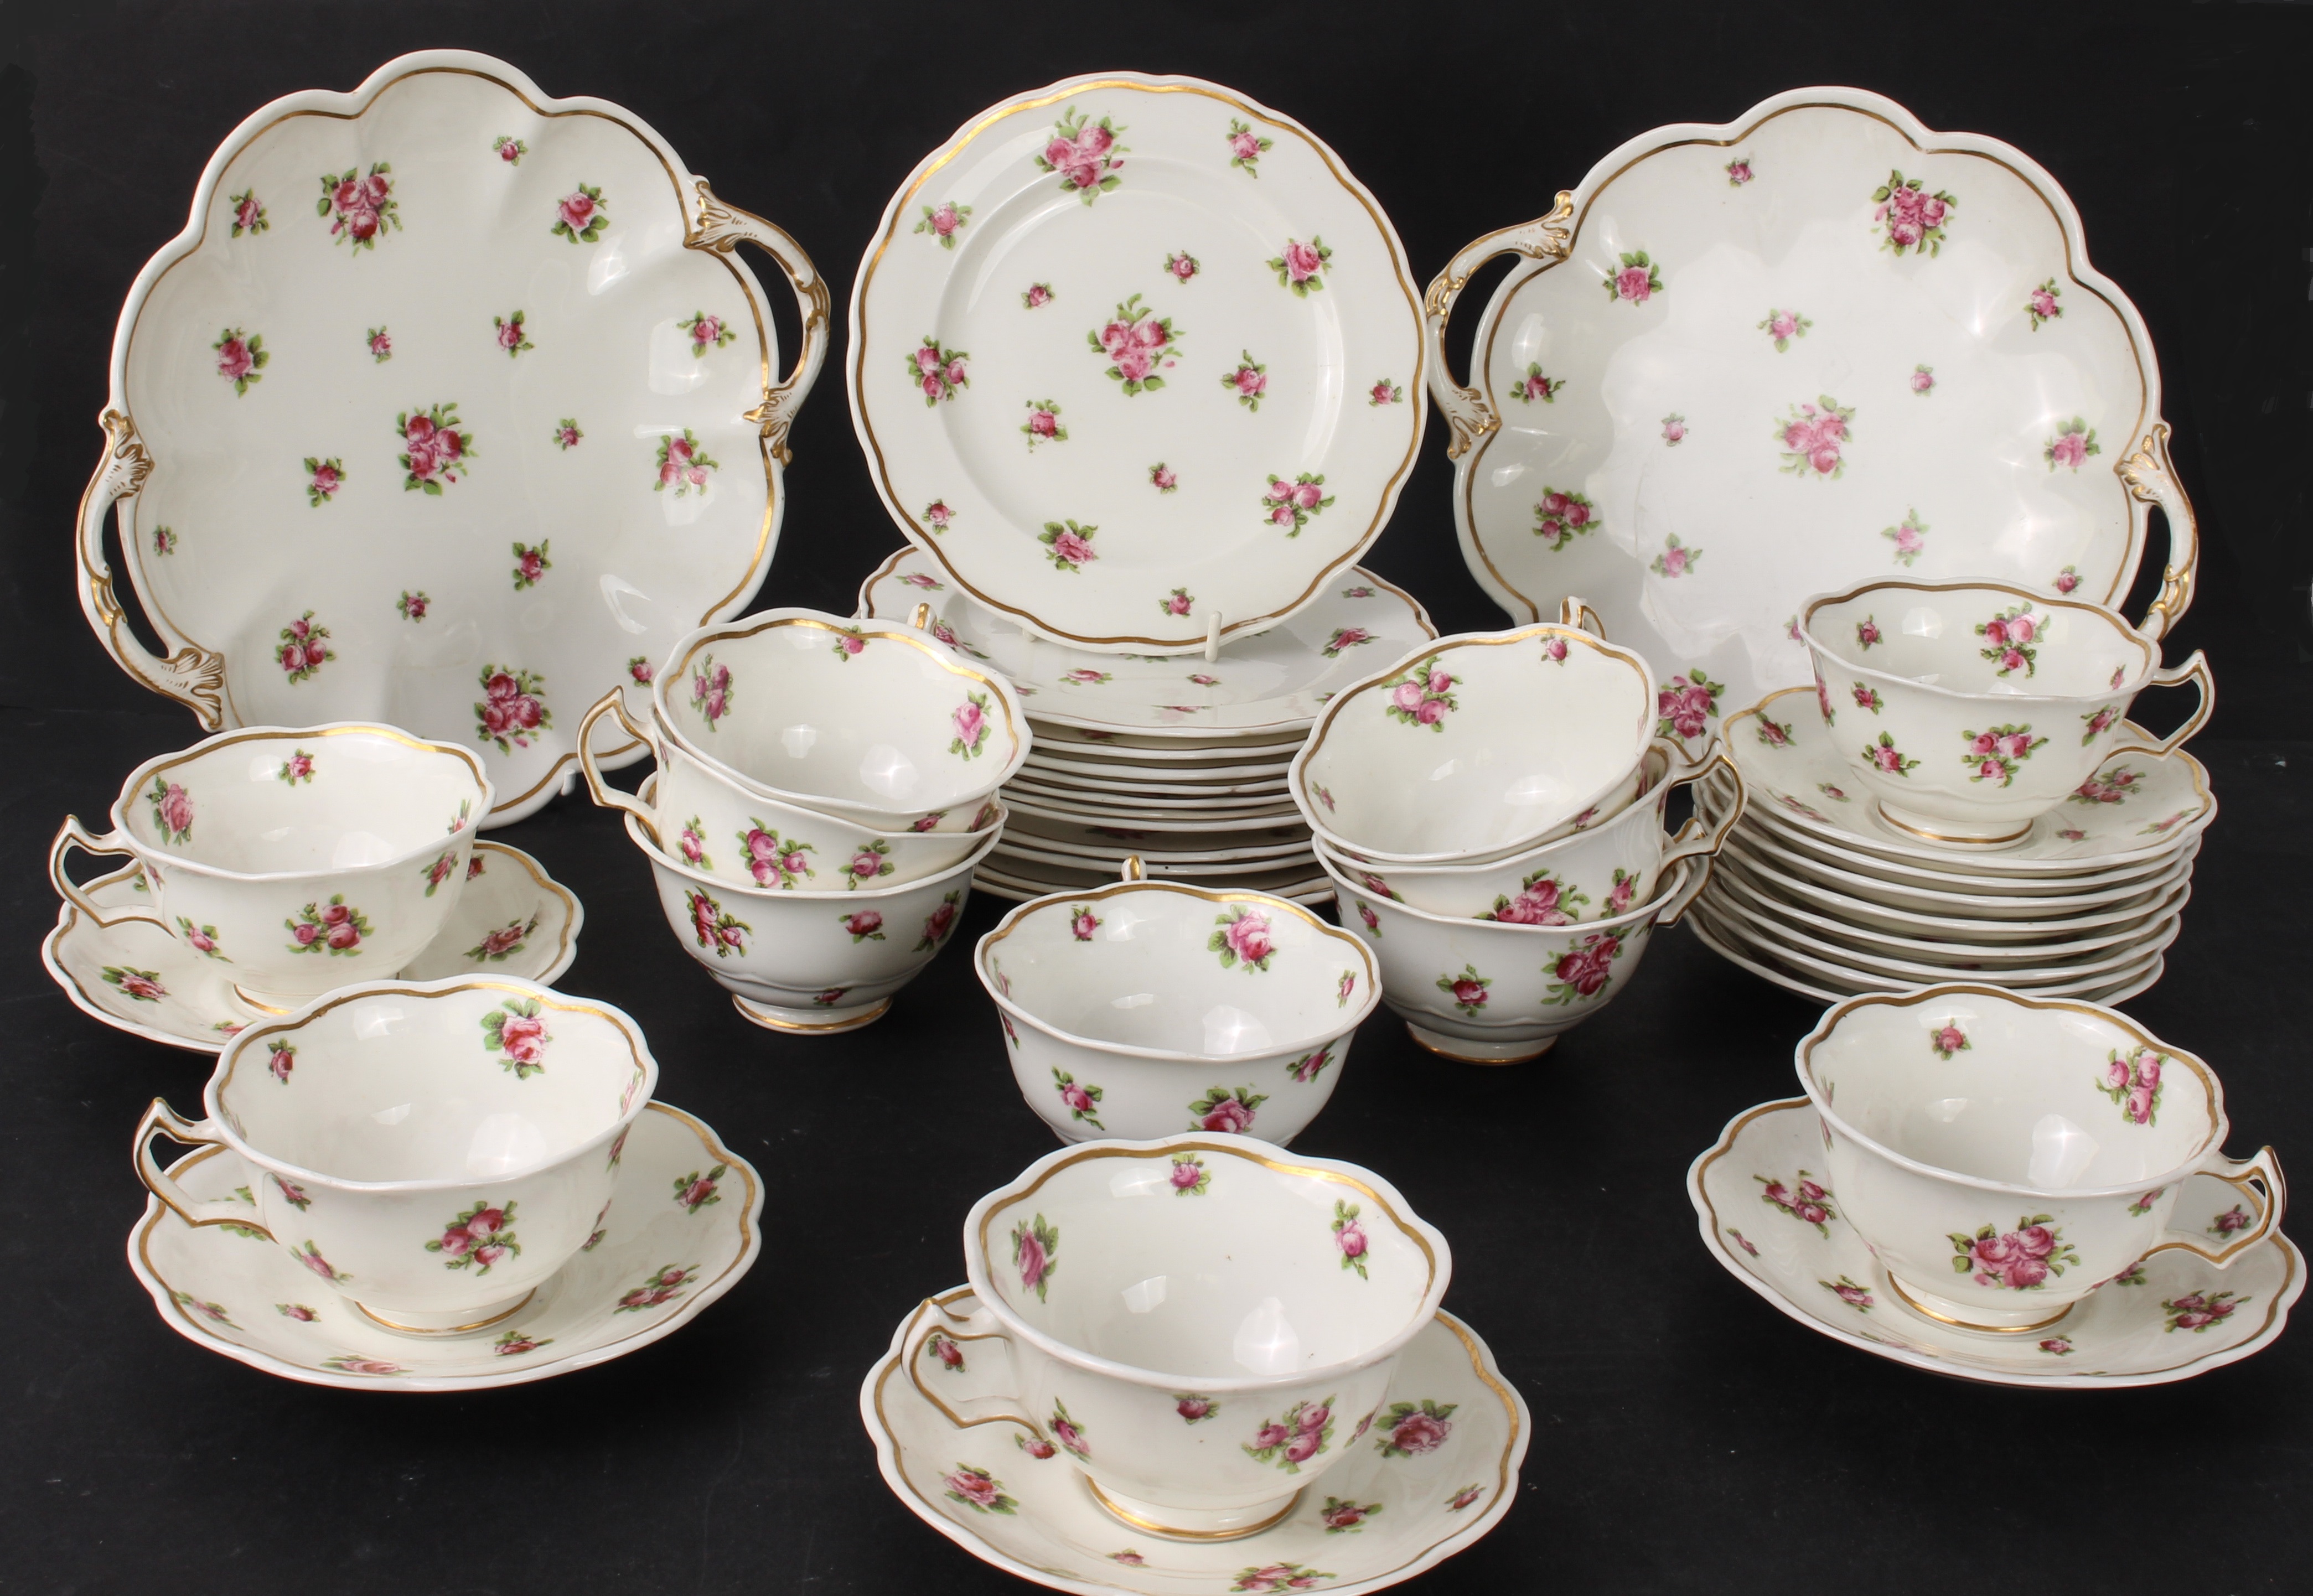 A vintage Crescent & Sons China pink rose decorated part tea service for twelve - pattern no. 17837,